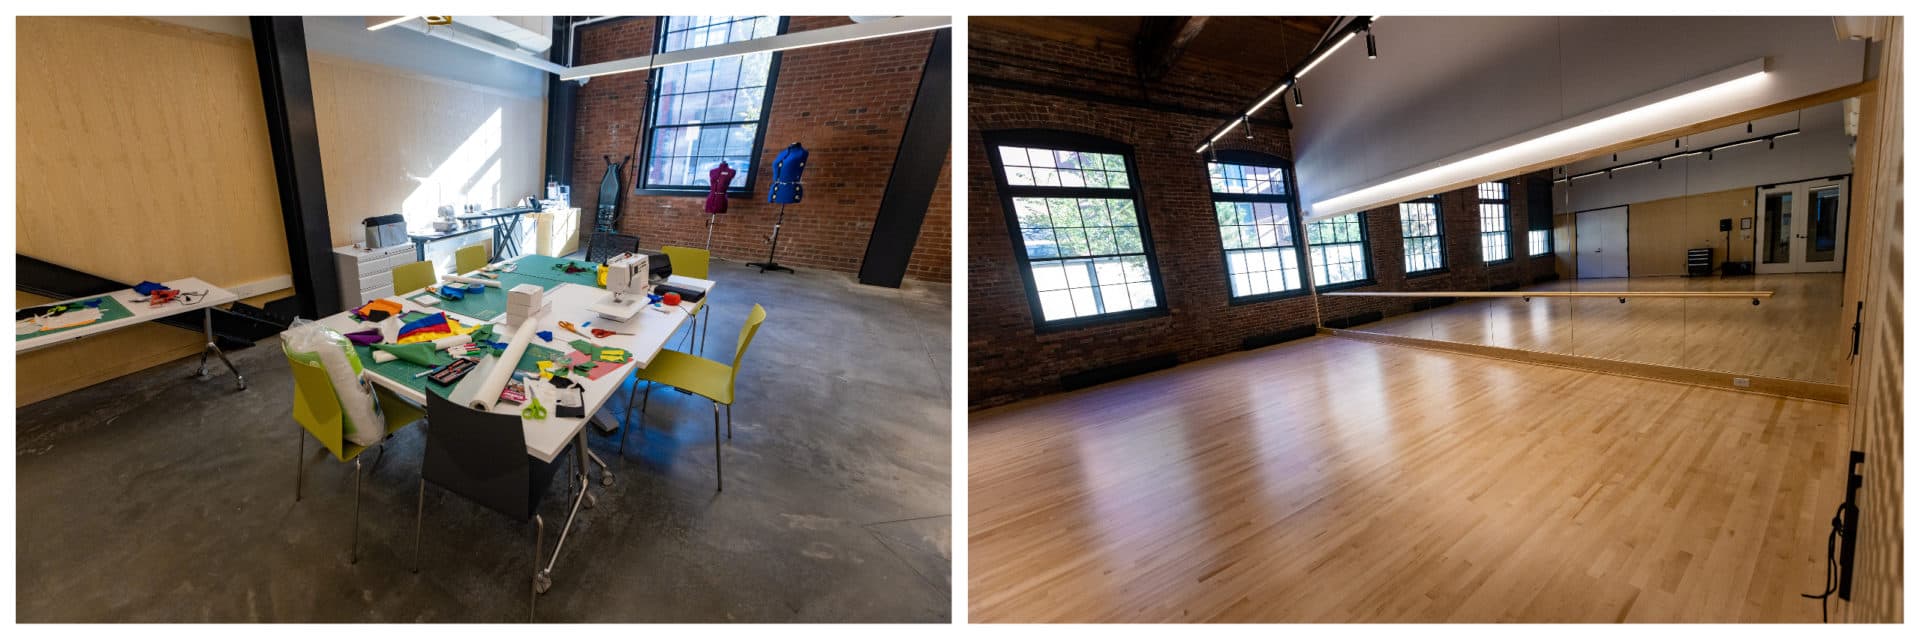 The Fiber Arts Room (left) and Dance Studio (right) at The Foundry.  (Jesse Costa/WBUR)